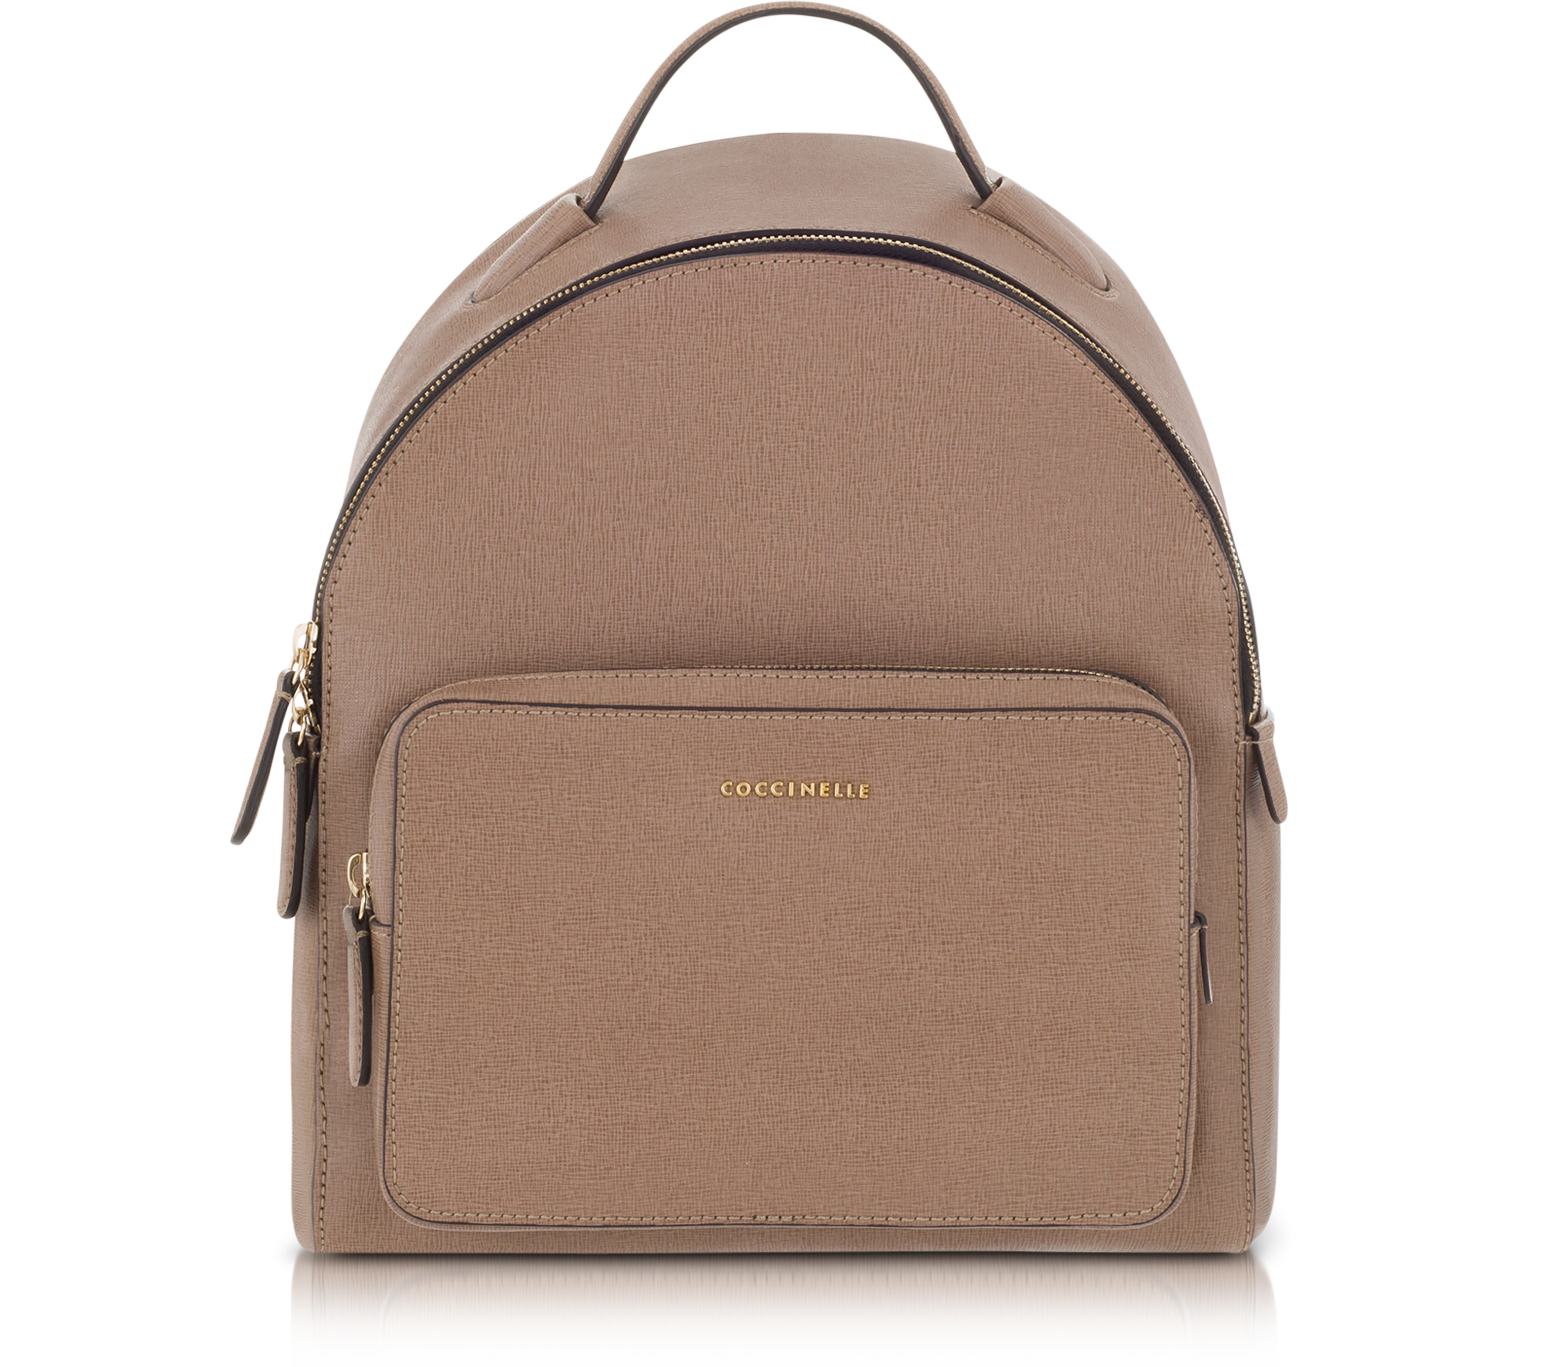 Coccinelle Taupe Clementine Leather Backpack at FORZIERI